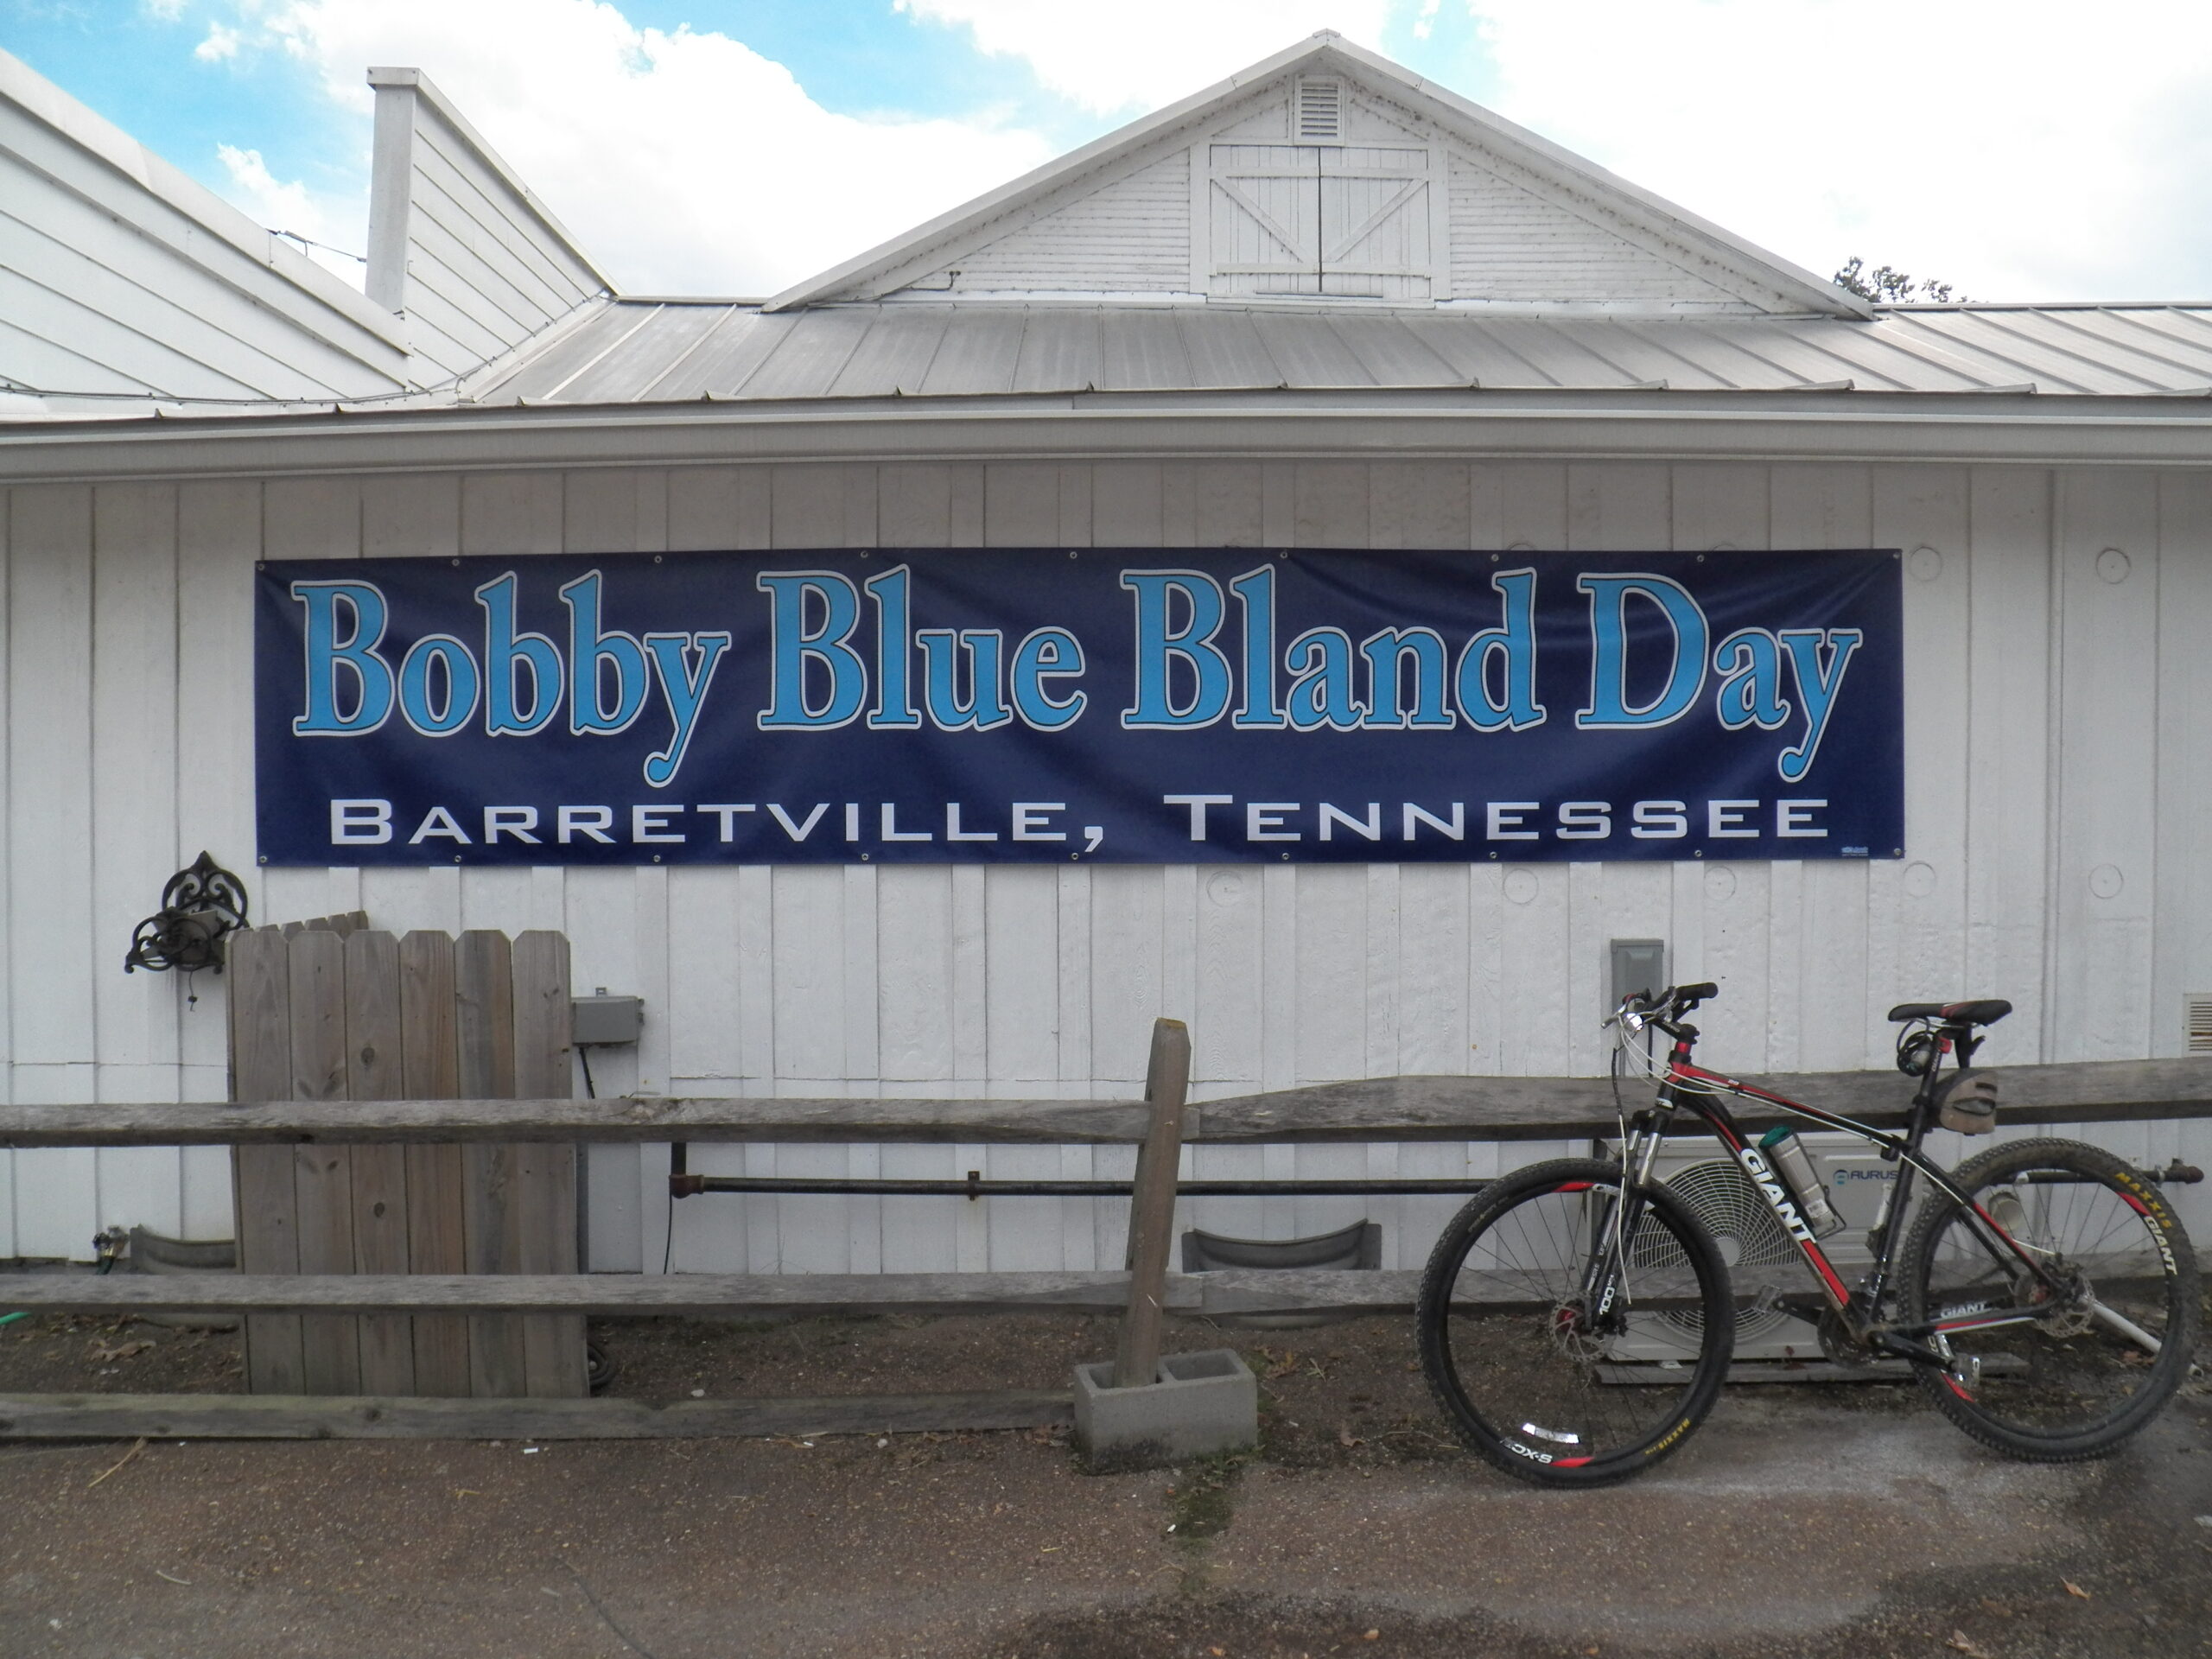 Further On Up The Road: Celebrating the Legacy of Bobby “Blue” Bland in Barretville